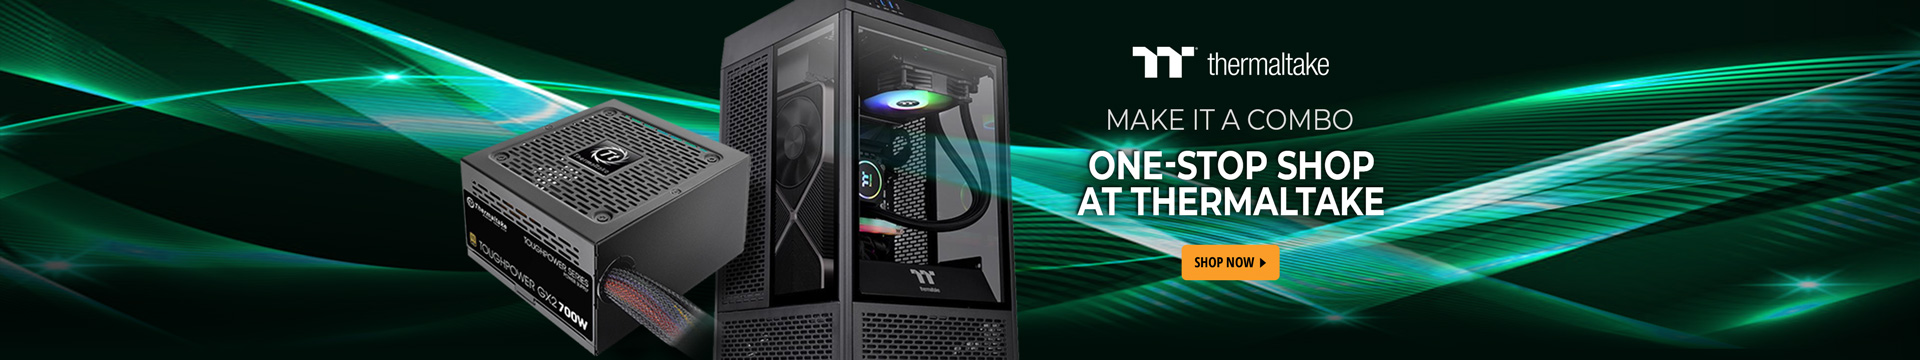 ONE-STOP SHOP AT THERMALTAKE